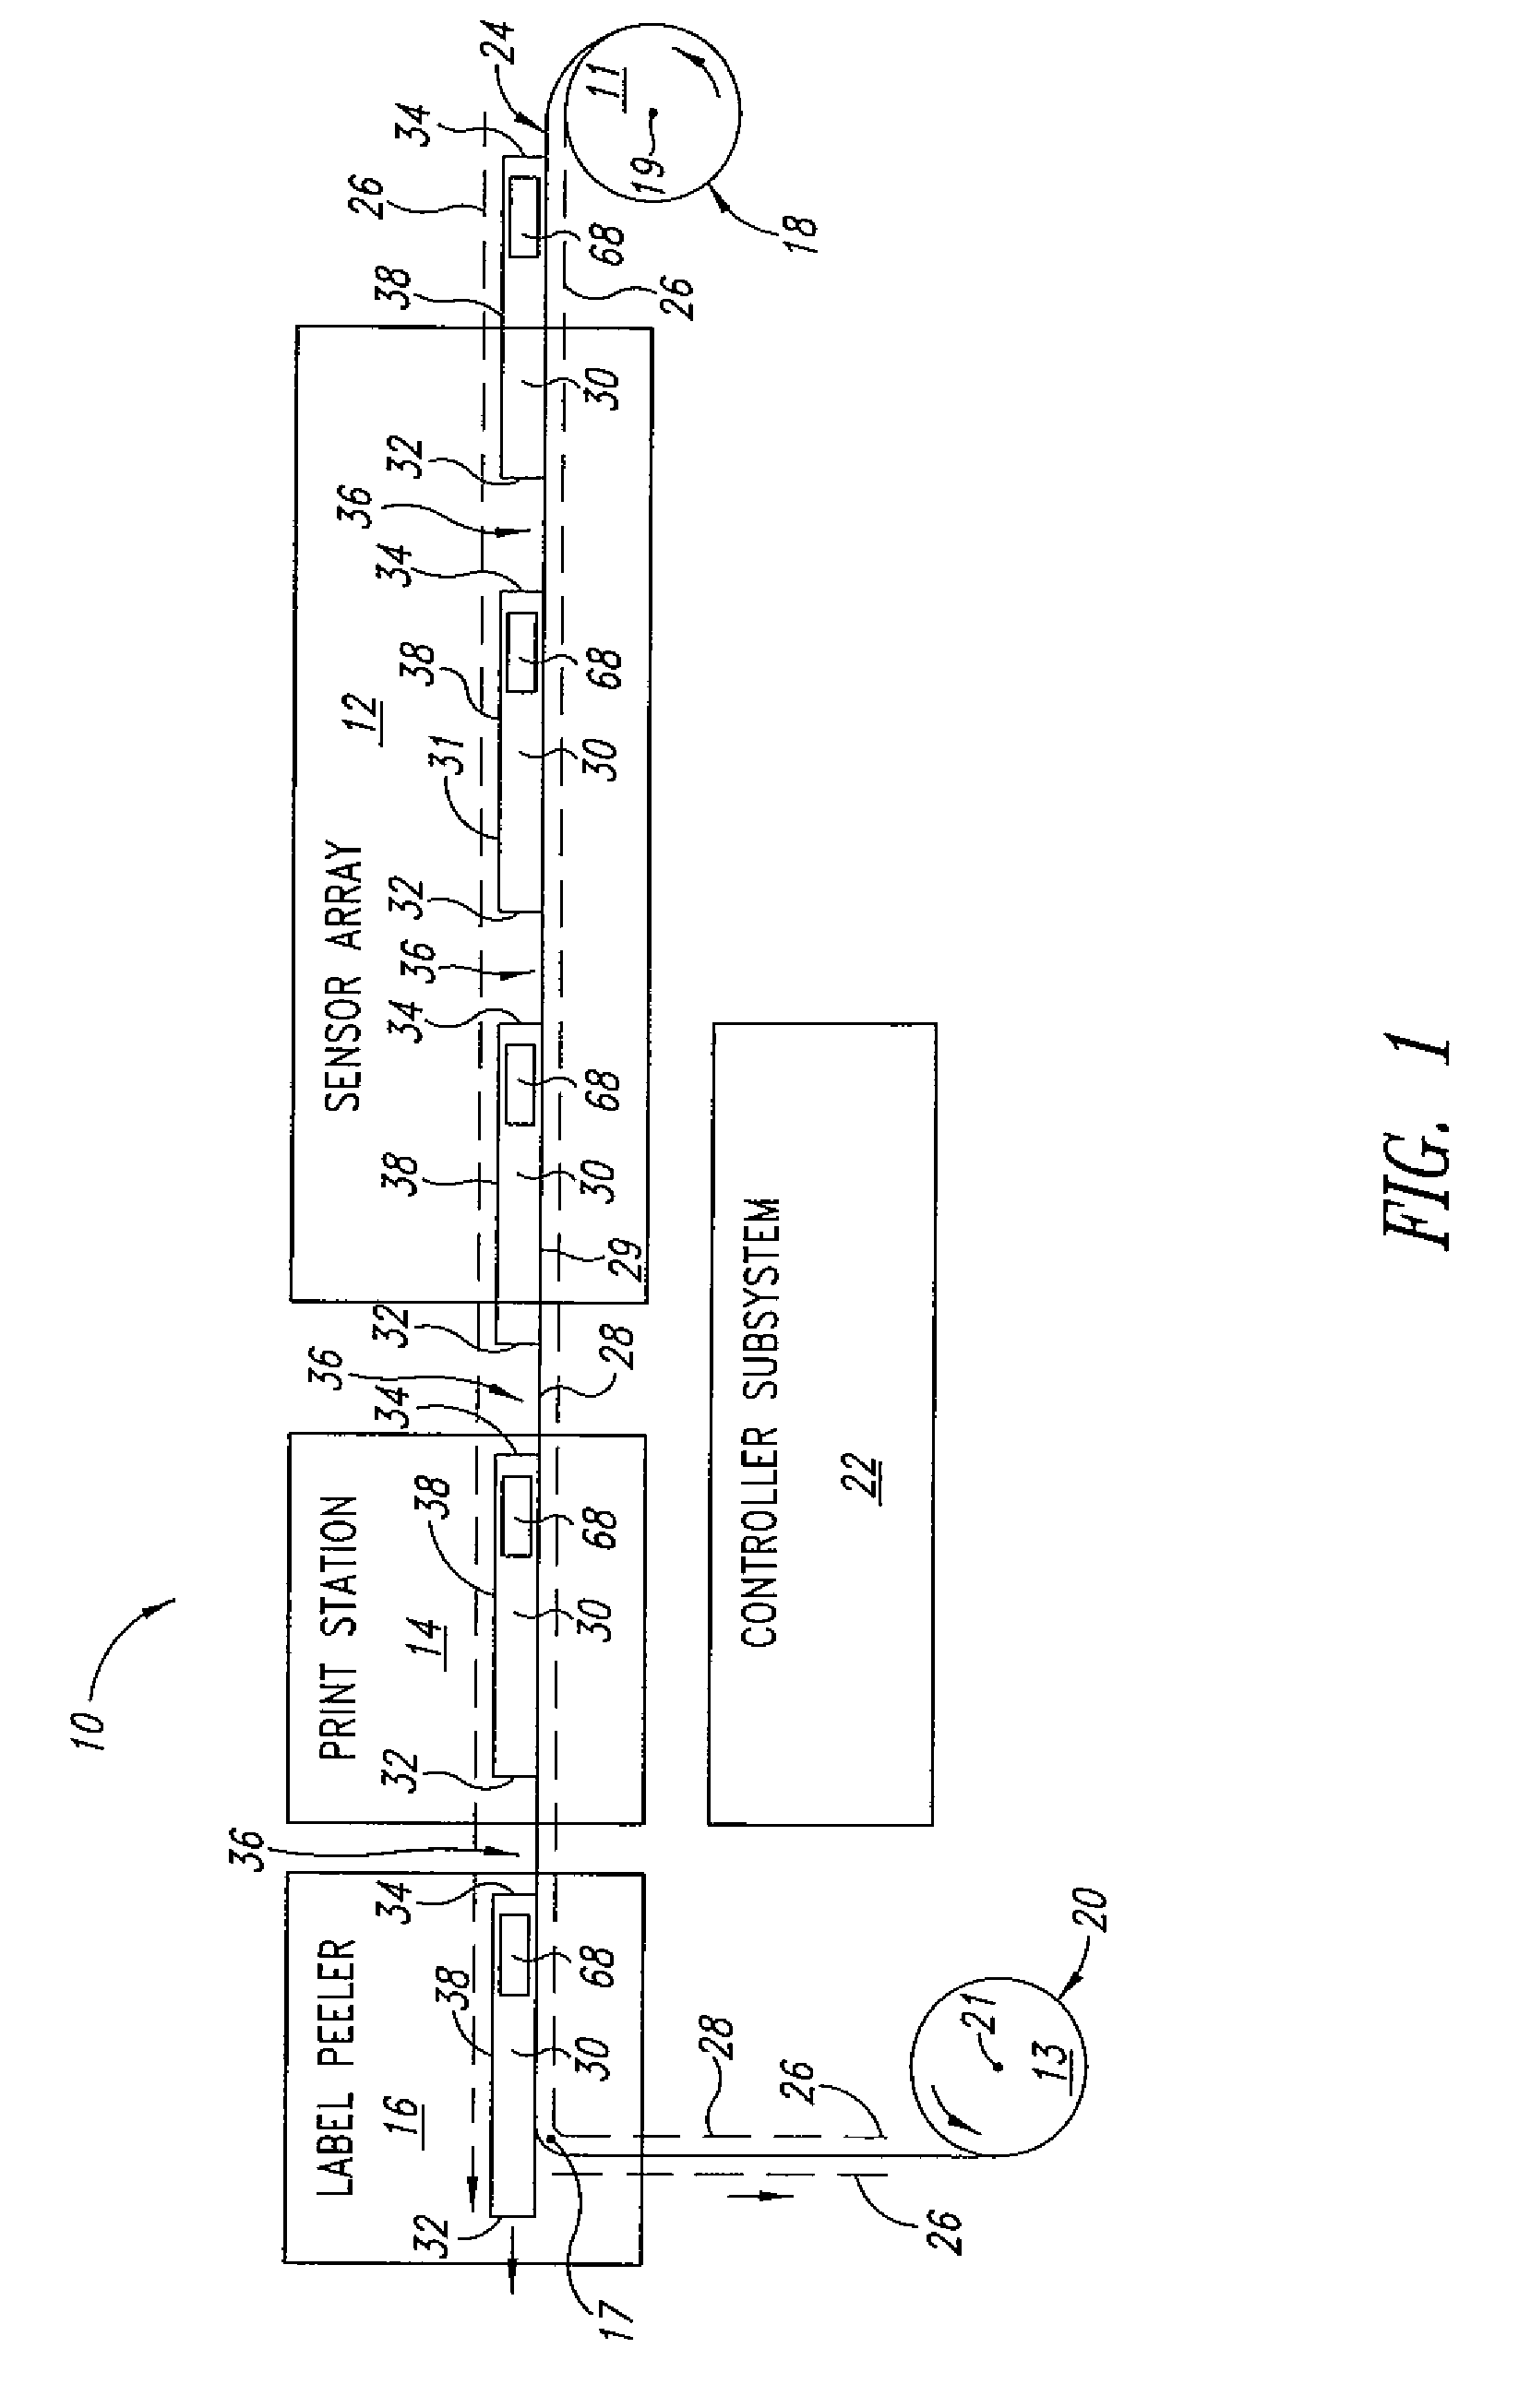 Method and apparatus for registering and maintaining registration of a medium in a content applicator